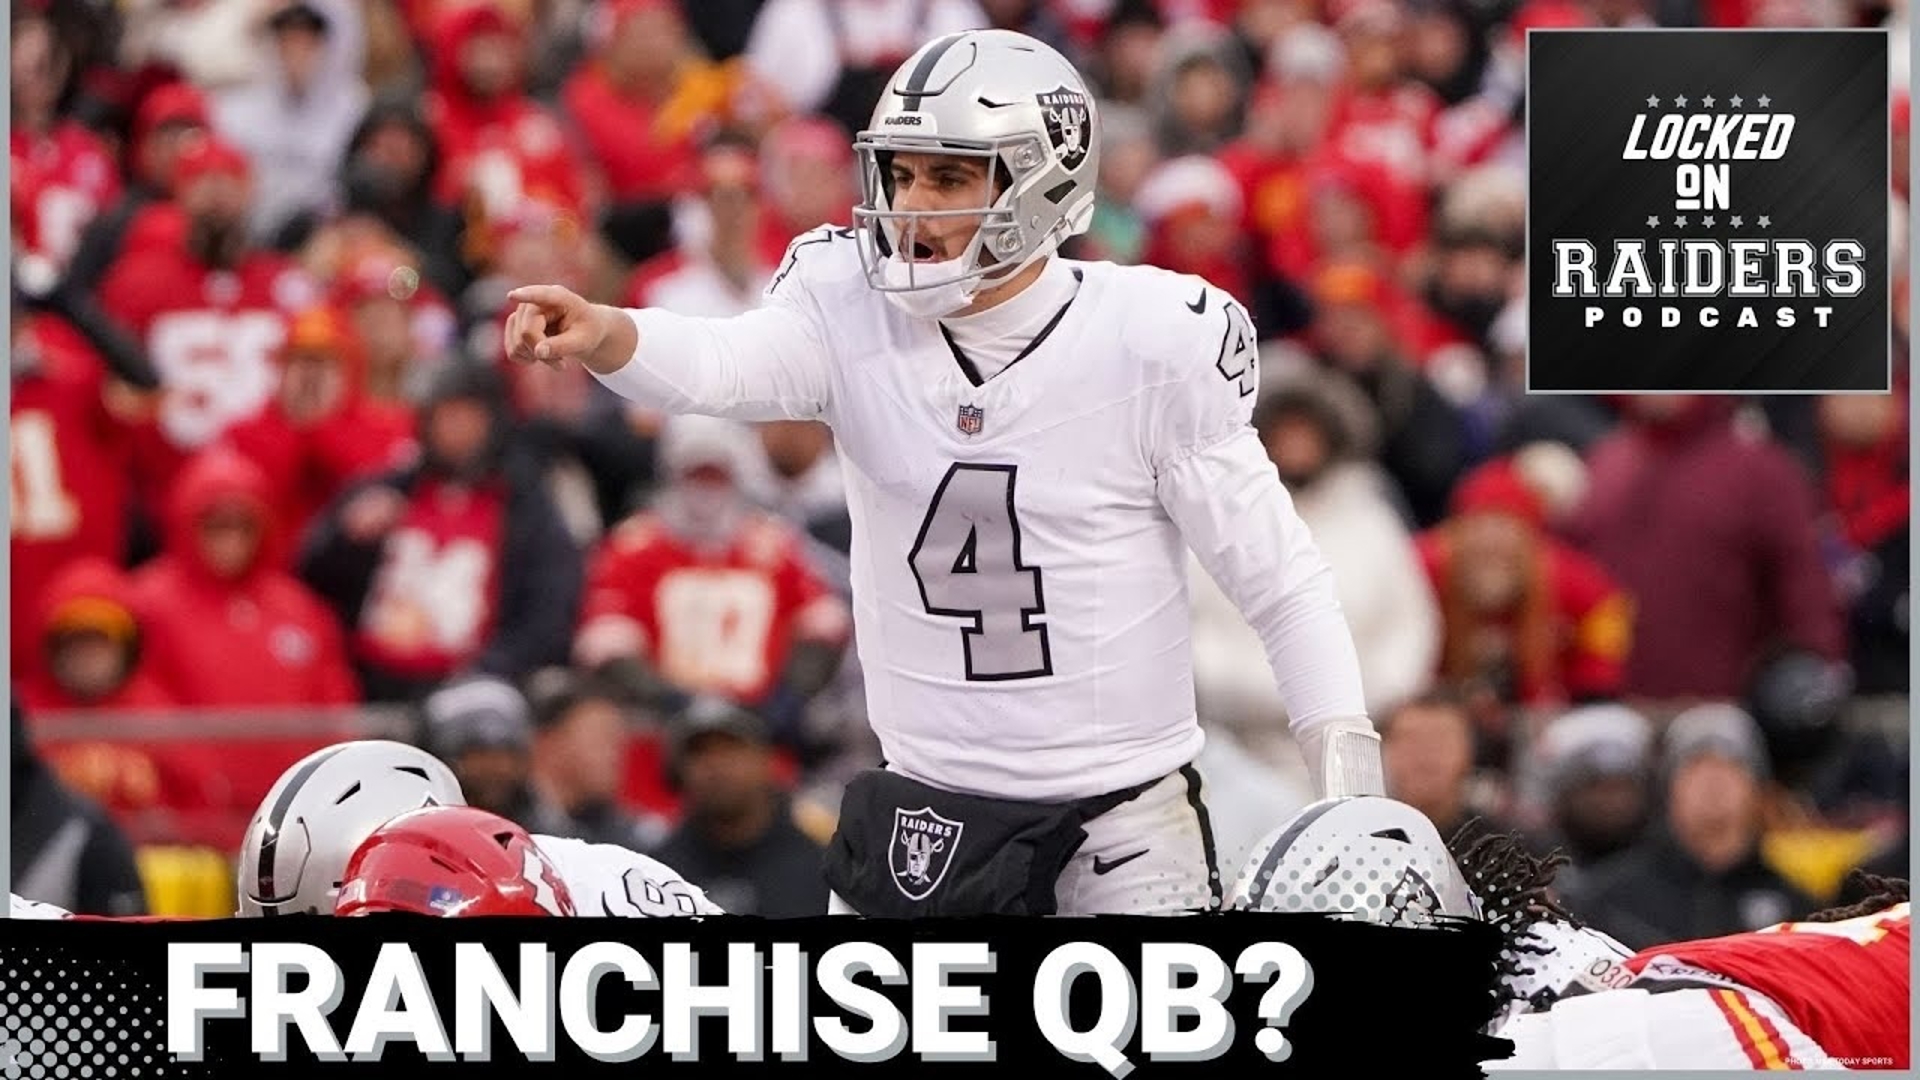 We will take a deep dive into the QB conversation and what the Raiders options are if the franchise QB is not on the current roster.